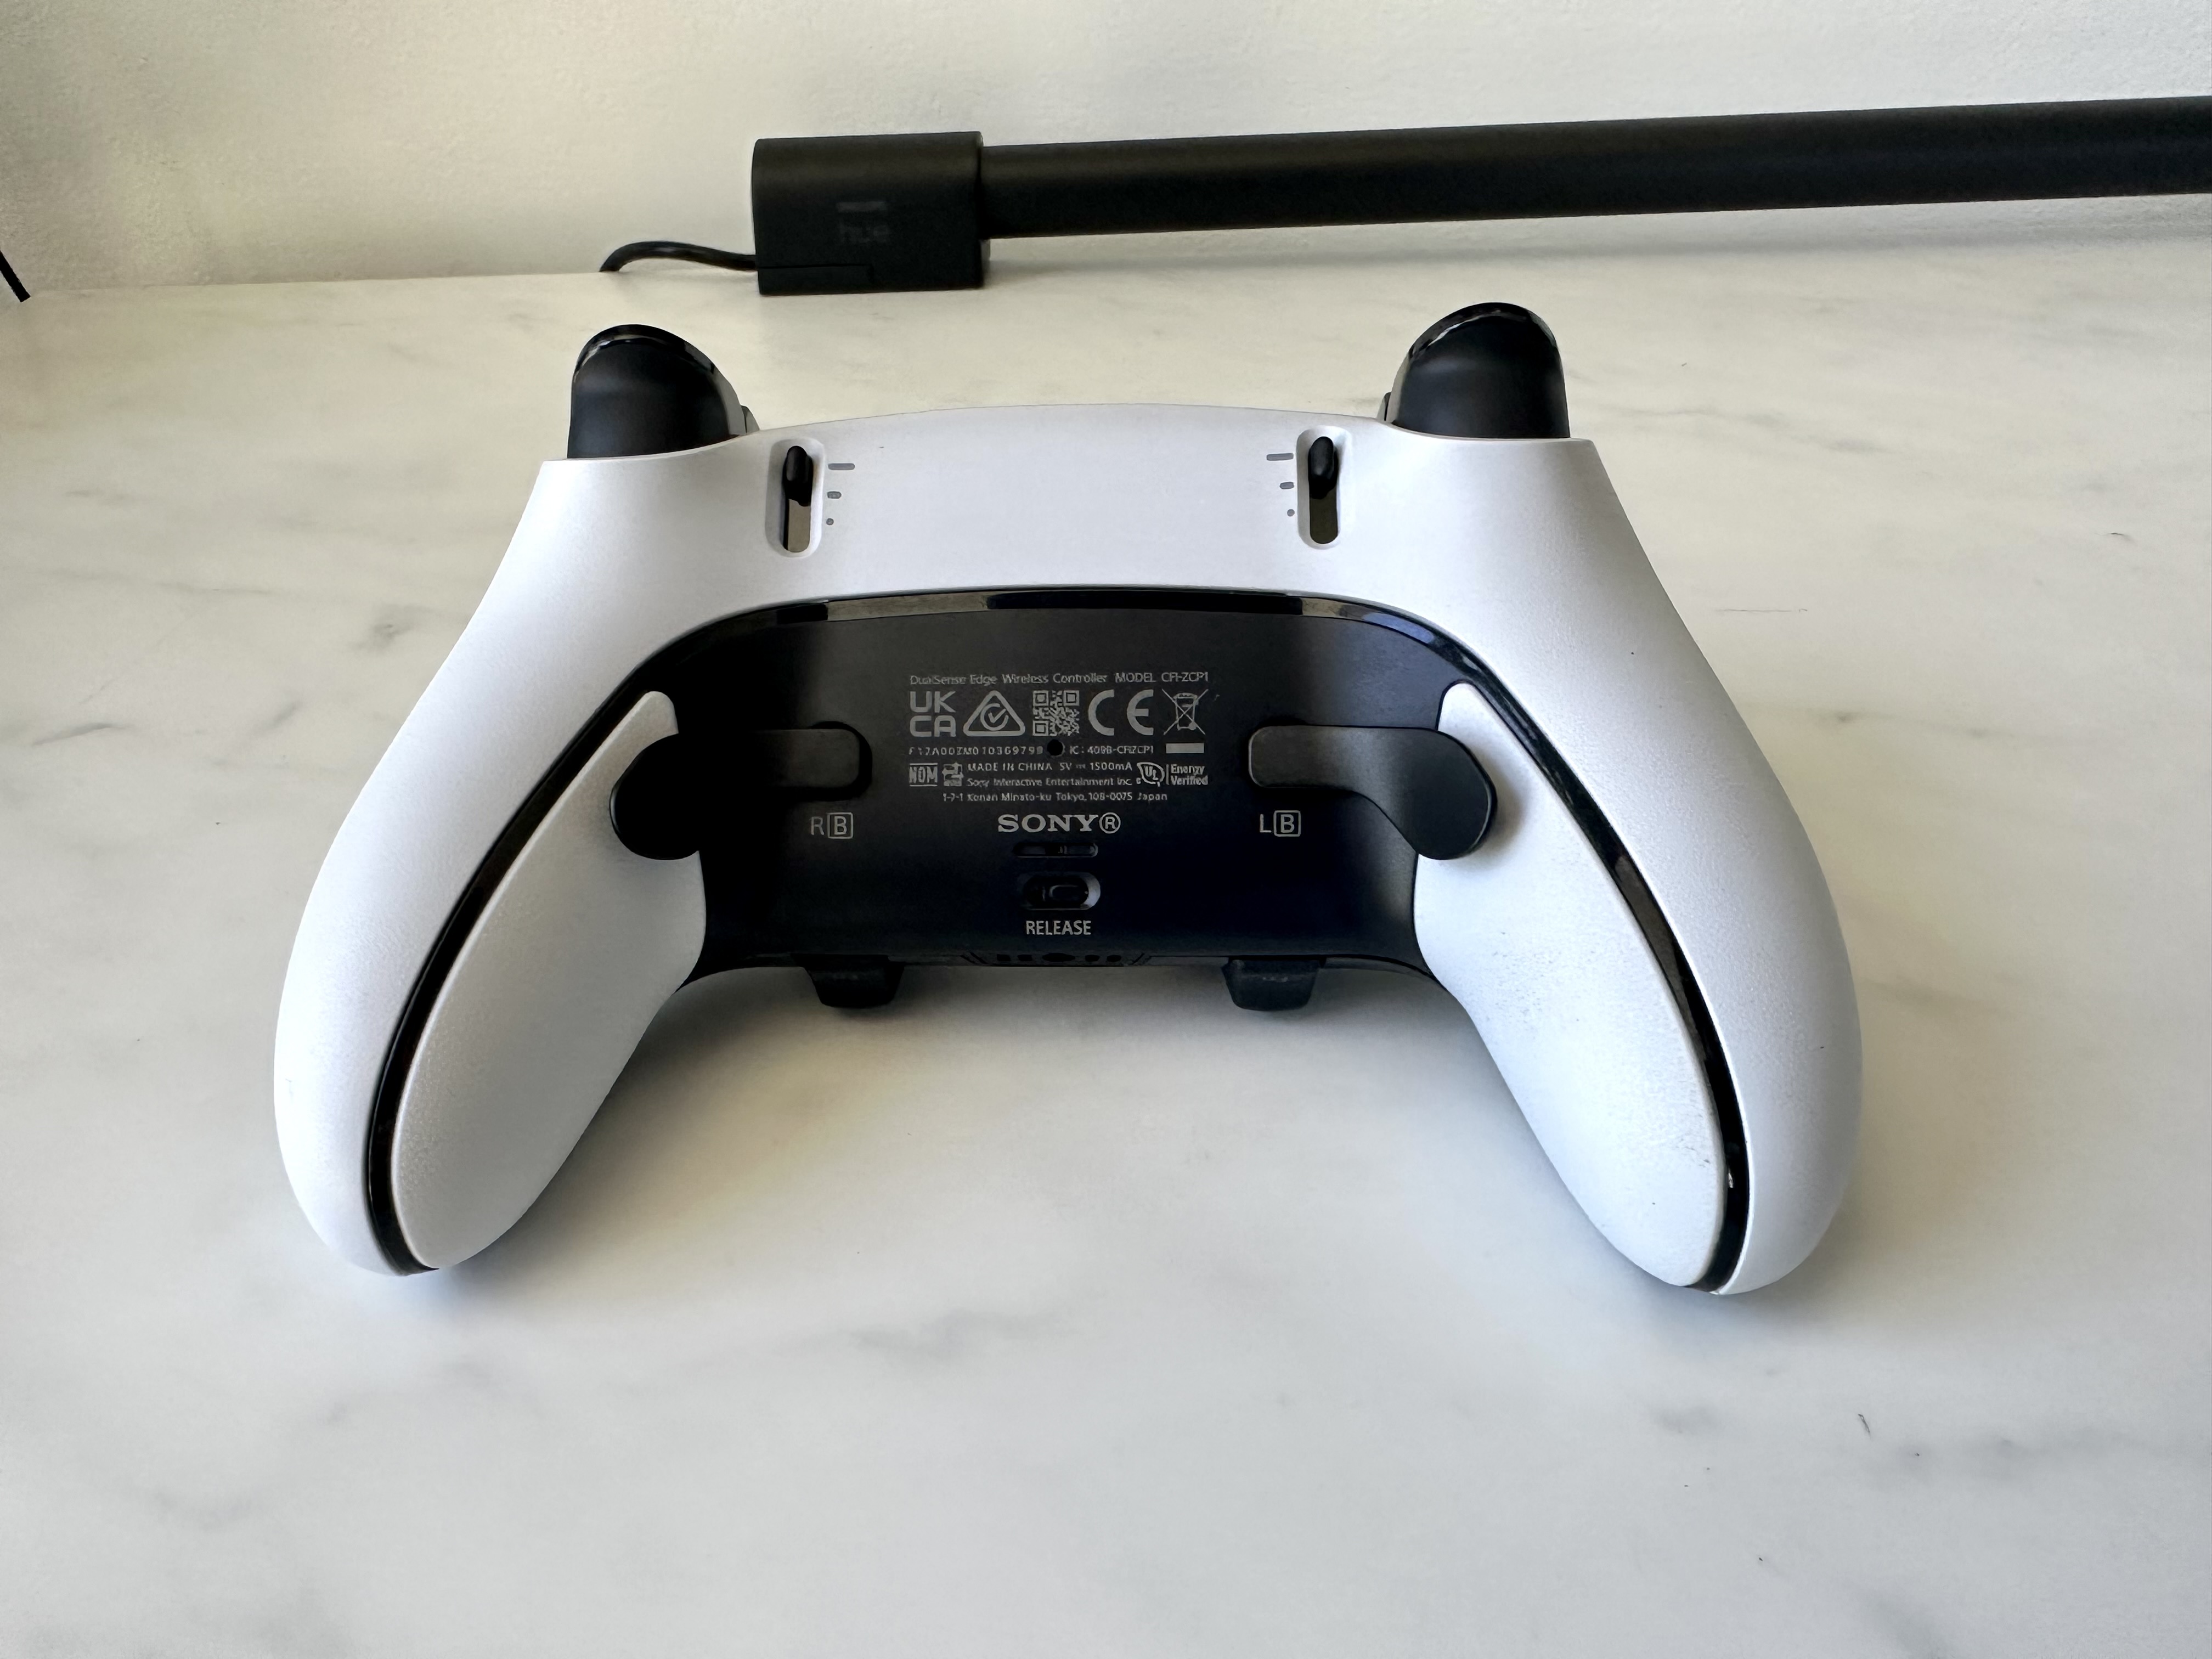 Underside of the playstation edge controller